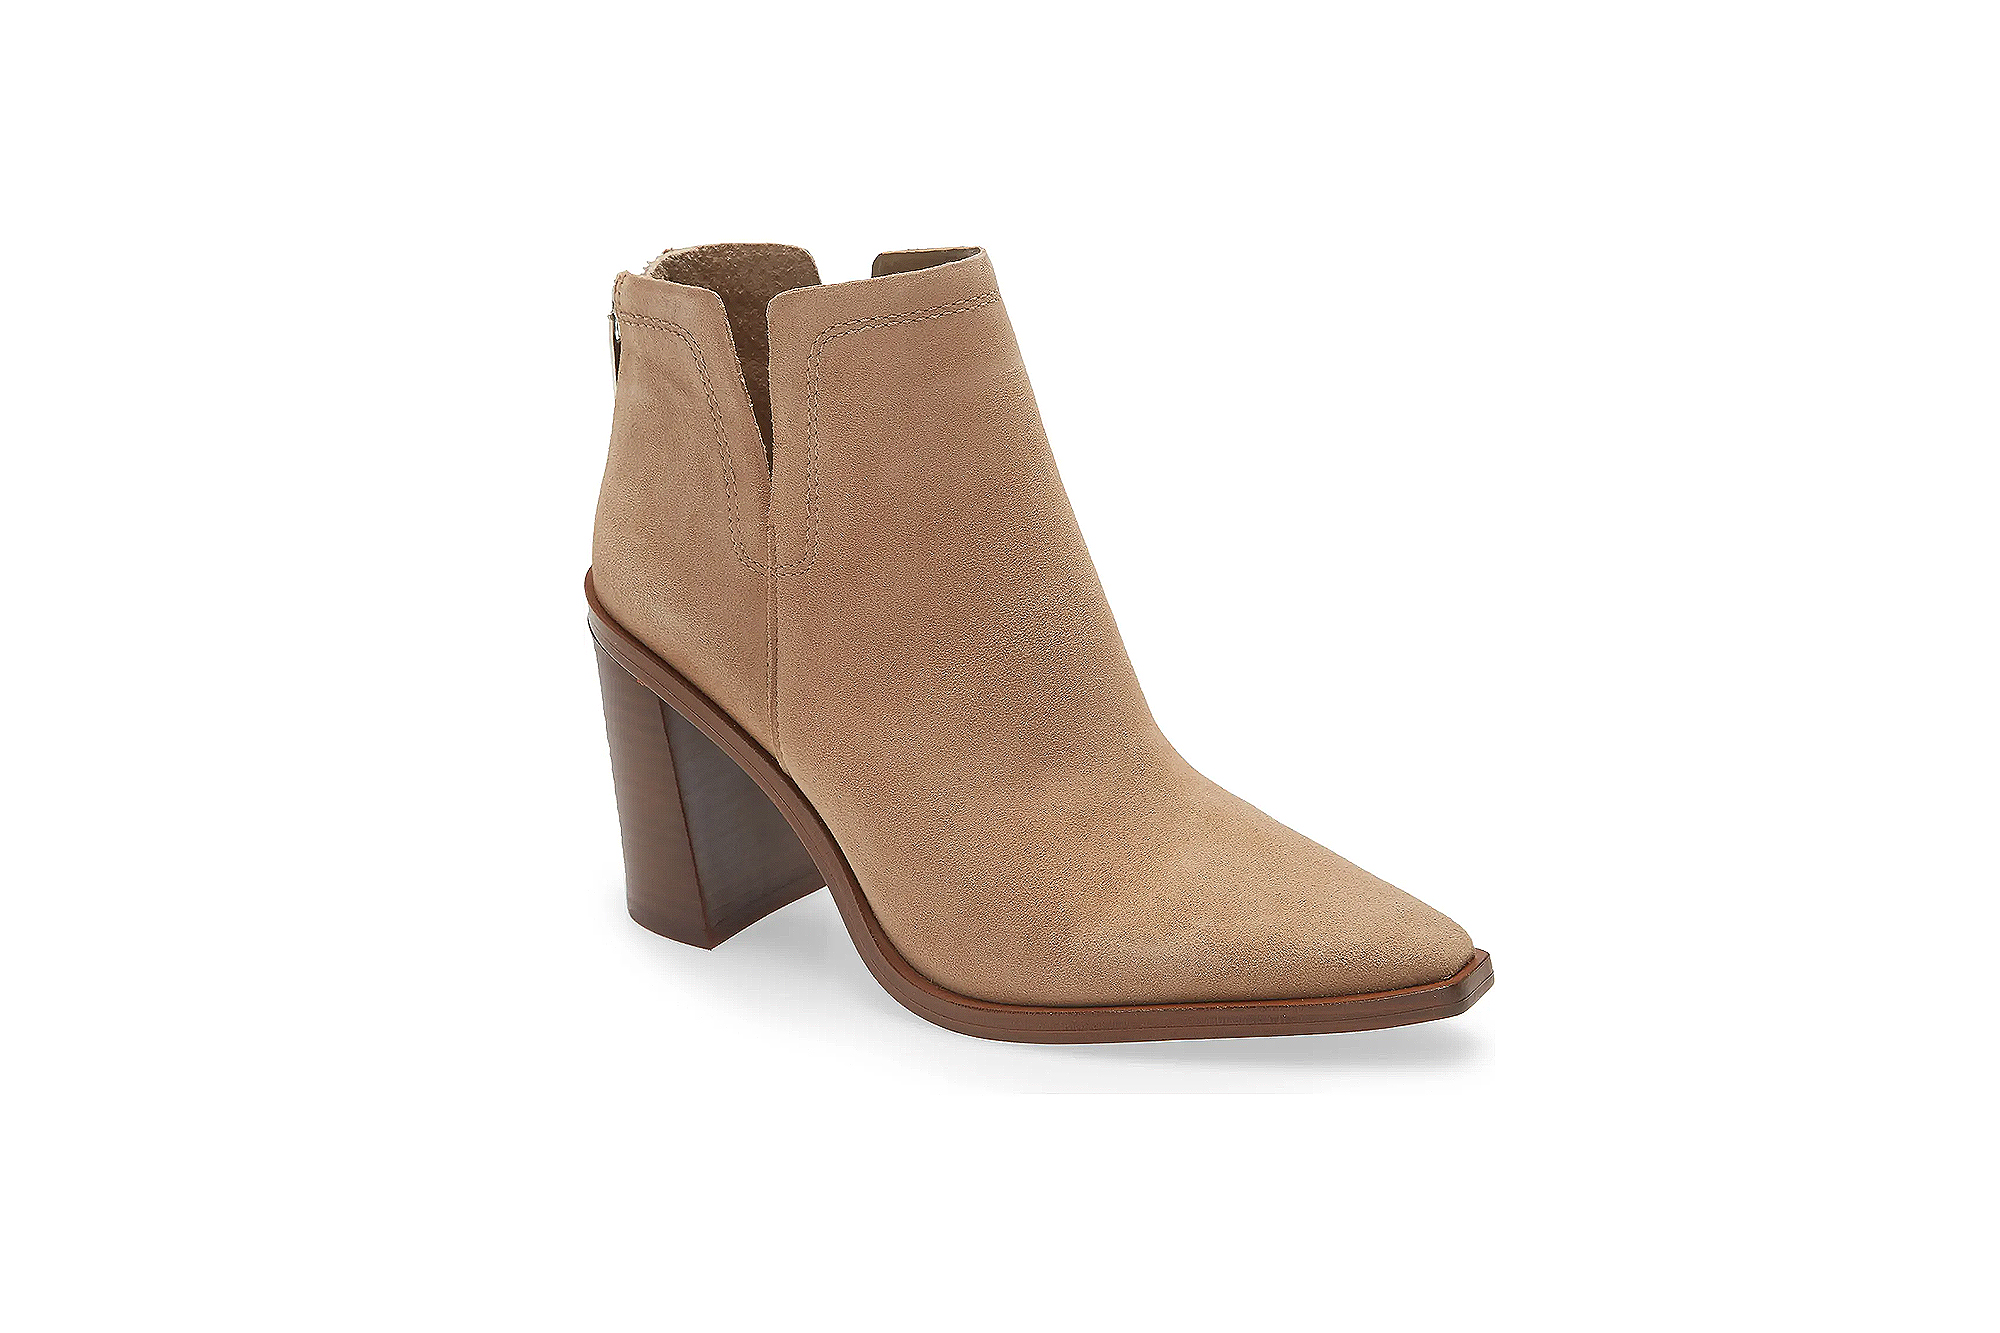 Vince Camino suede leather ankle boots - Shoes